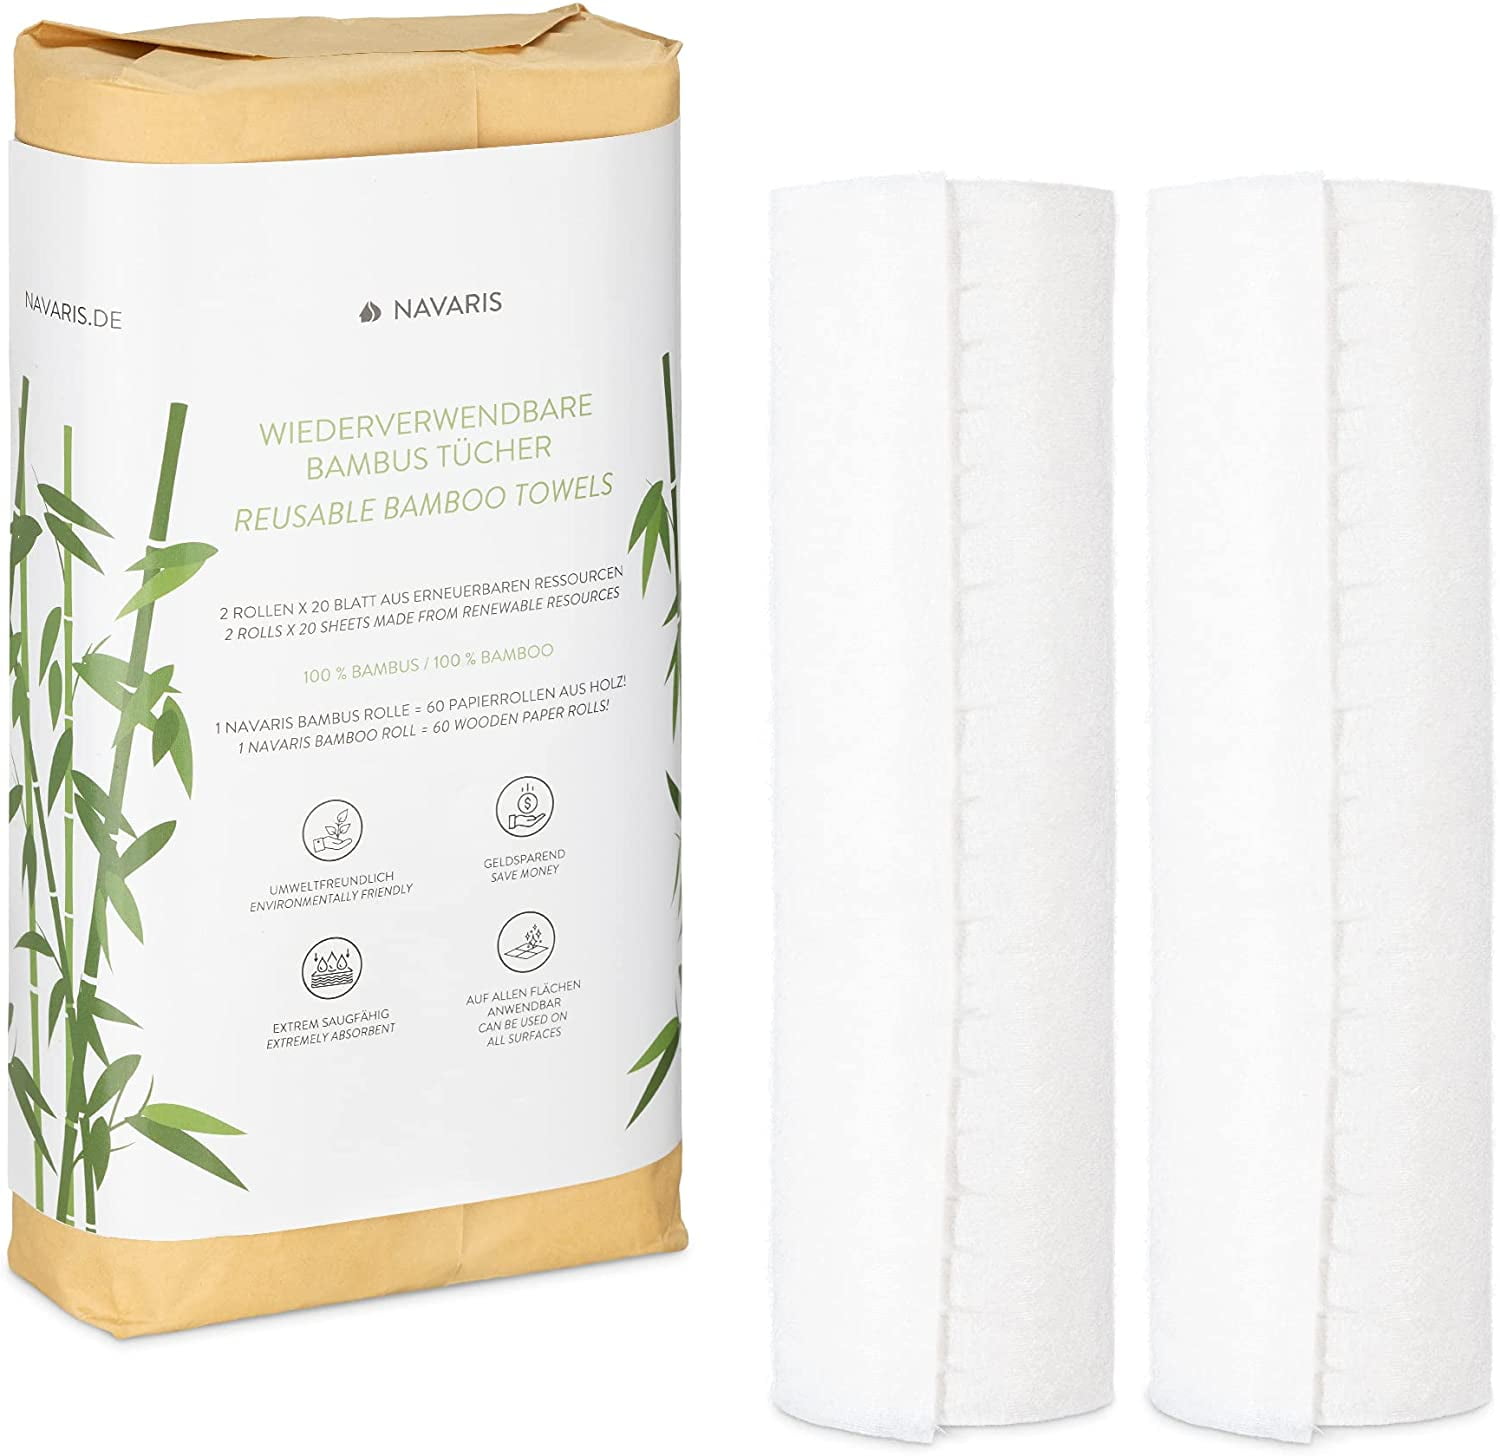 Details about   2 Pack Reuseable Bamboo Towels Cloths Bleachable Washable White Cleaning XL 